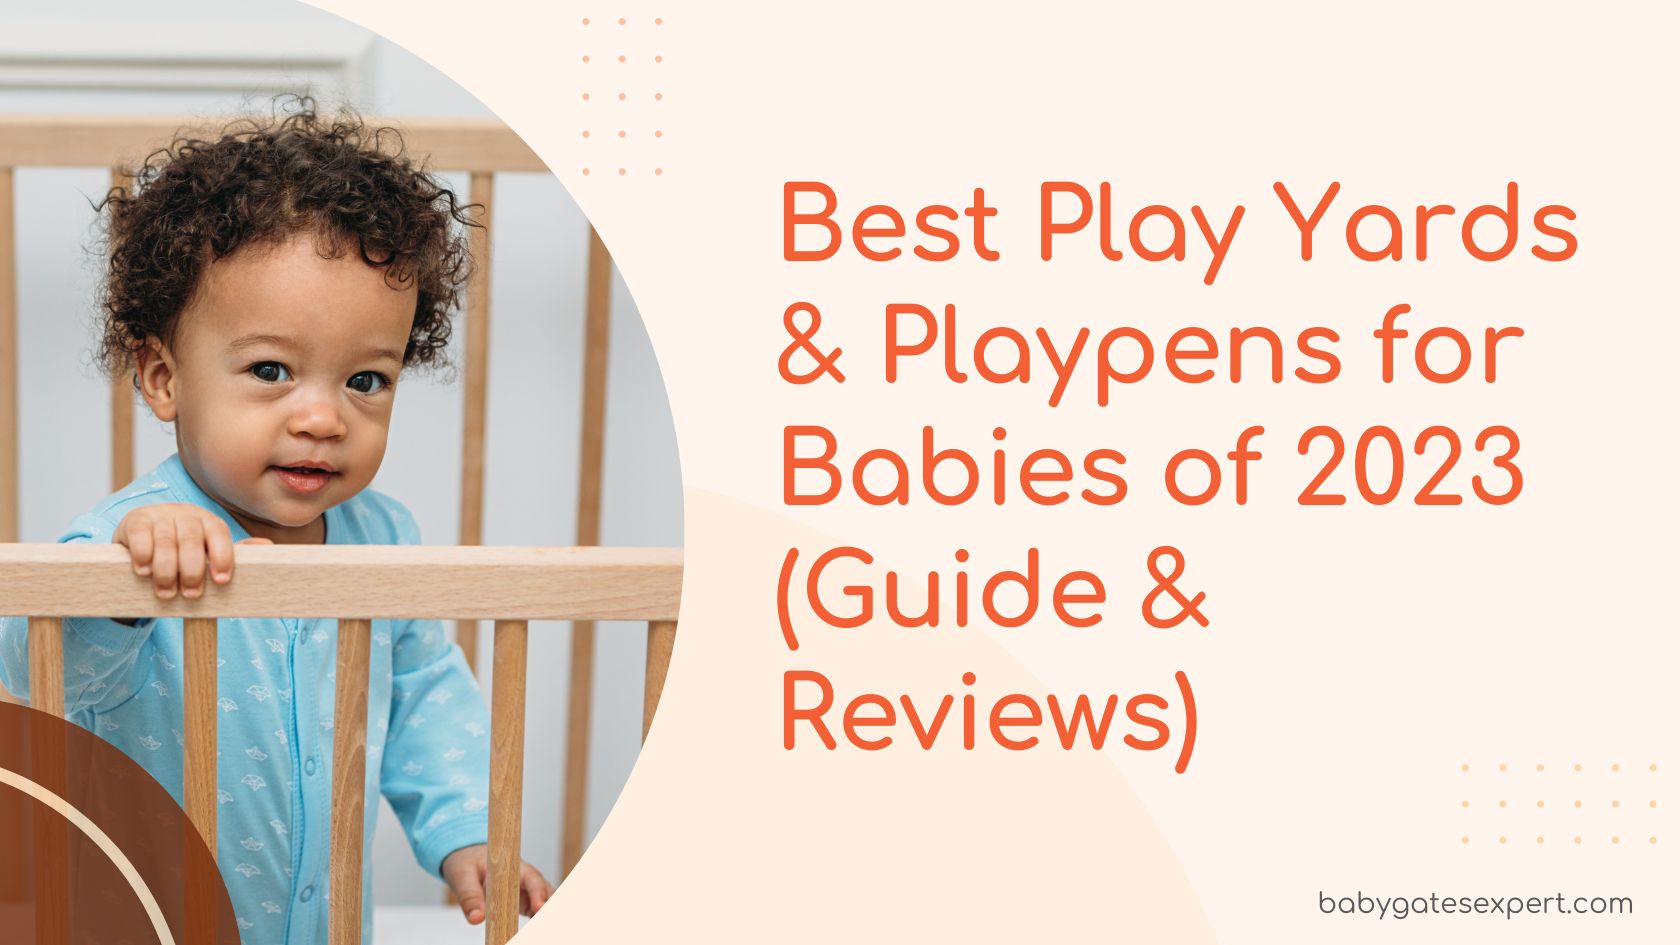 Best Play Yards & Playpens for Babies